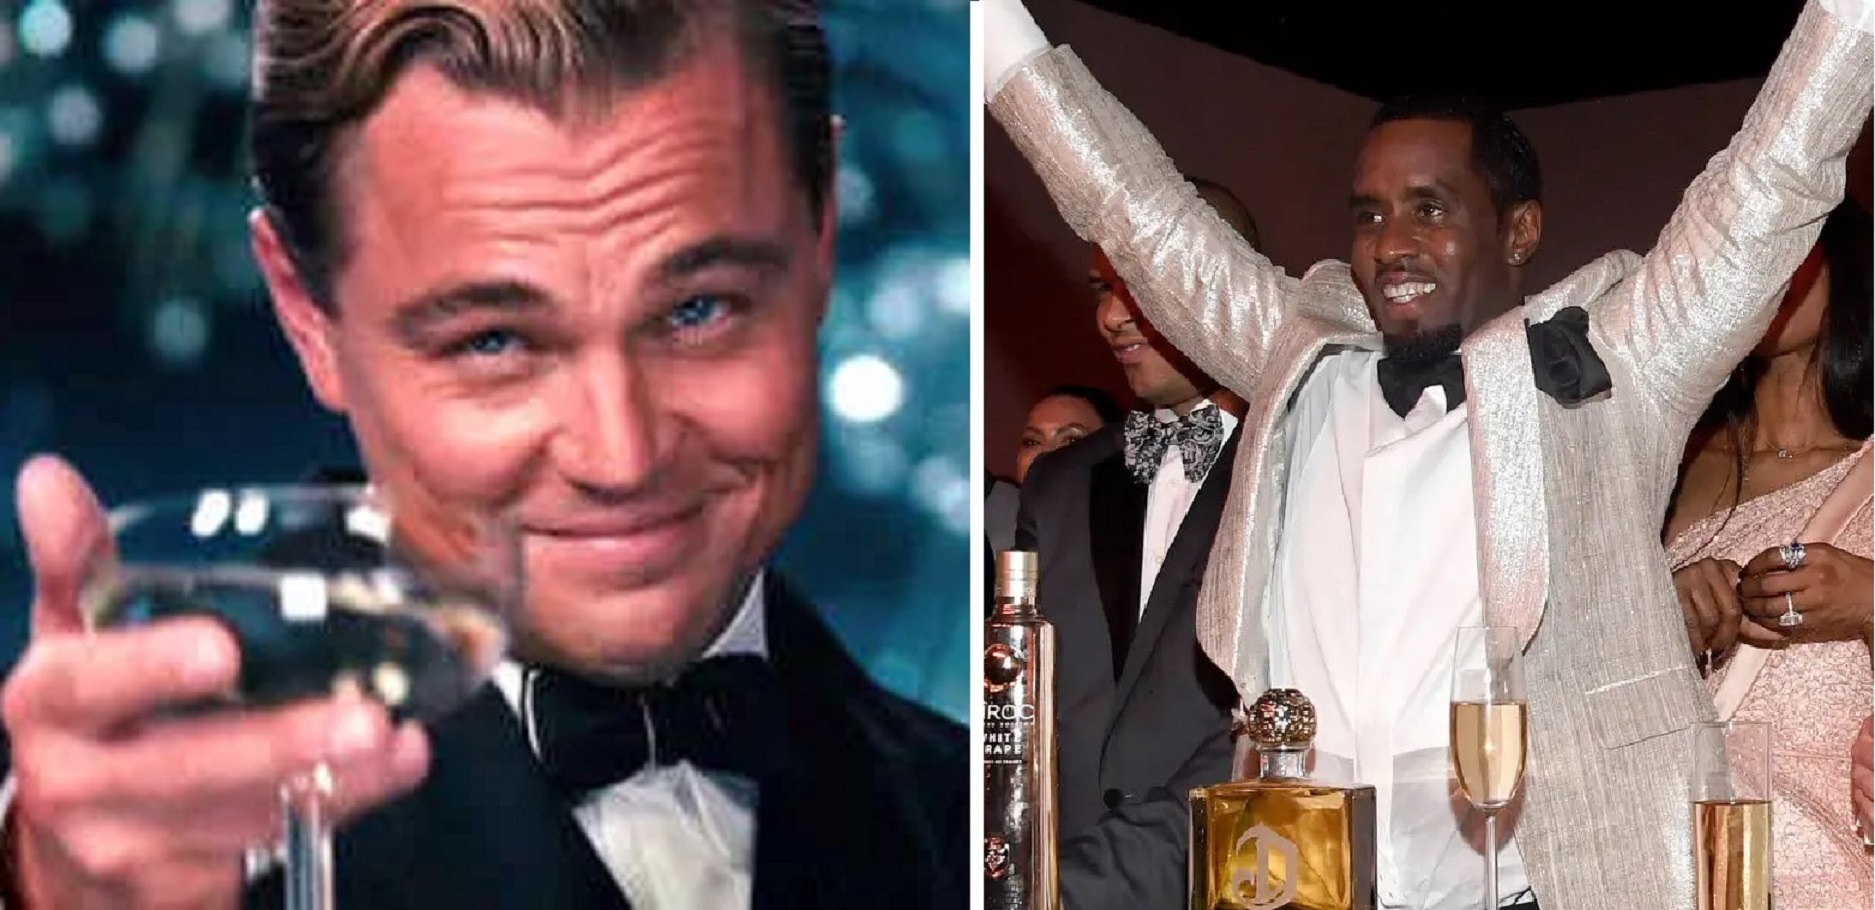 Leonardo DiCaprio Spotted ‘Awkward Dancing’ at P. Diddy’s B’day Bash!